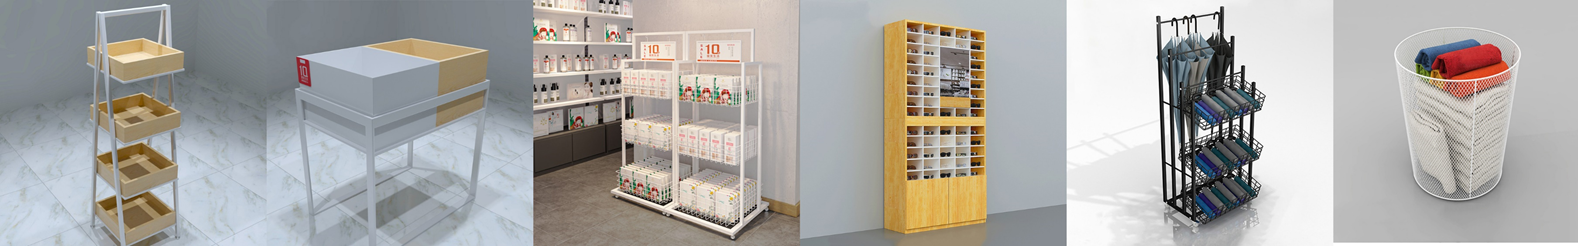 MINISO Display system